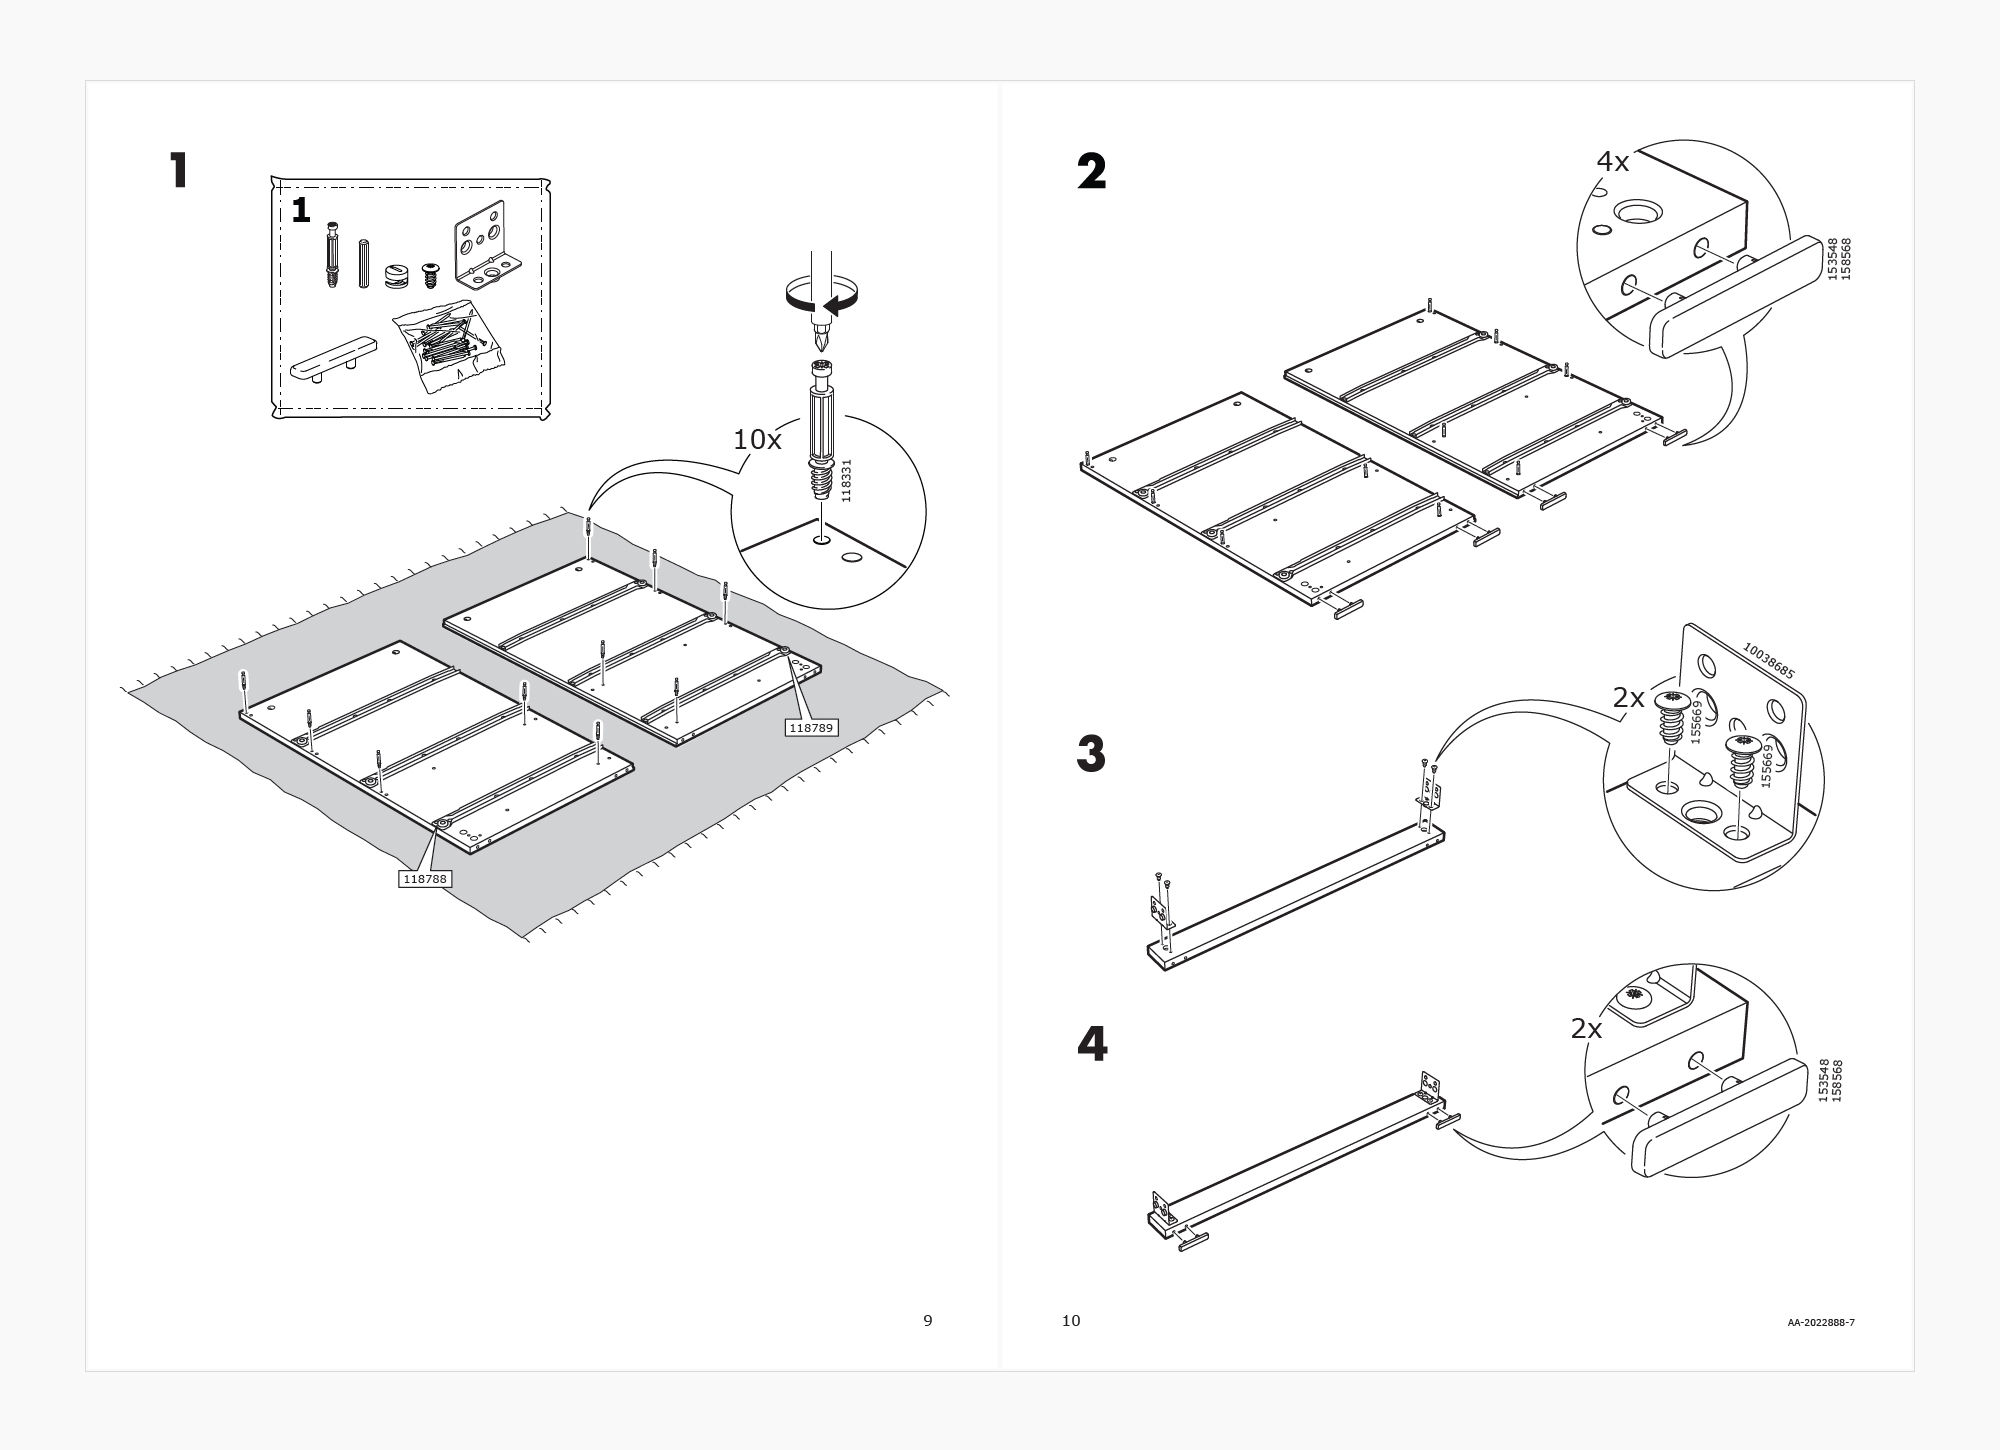 A diagram showing how to assemble a chest of drawers from furniture retailer IKEA.